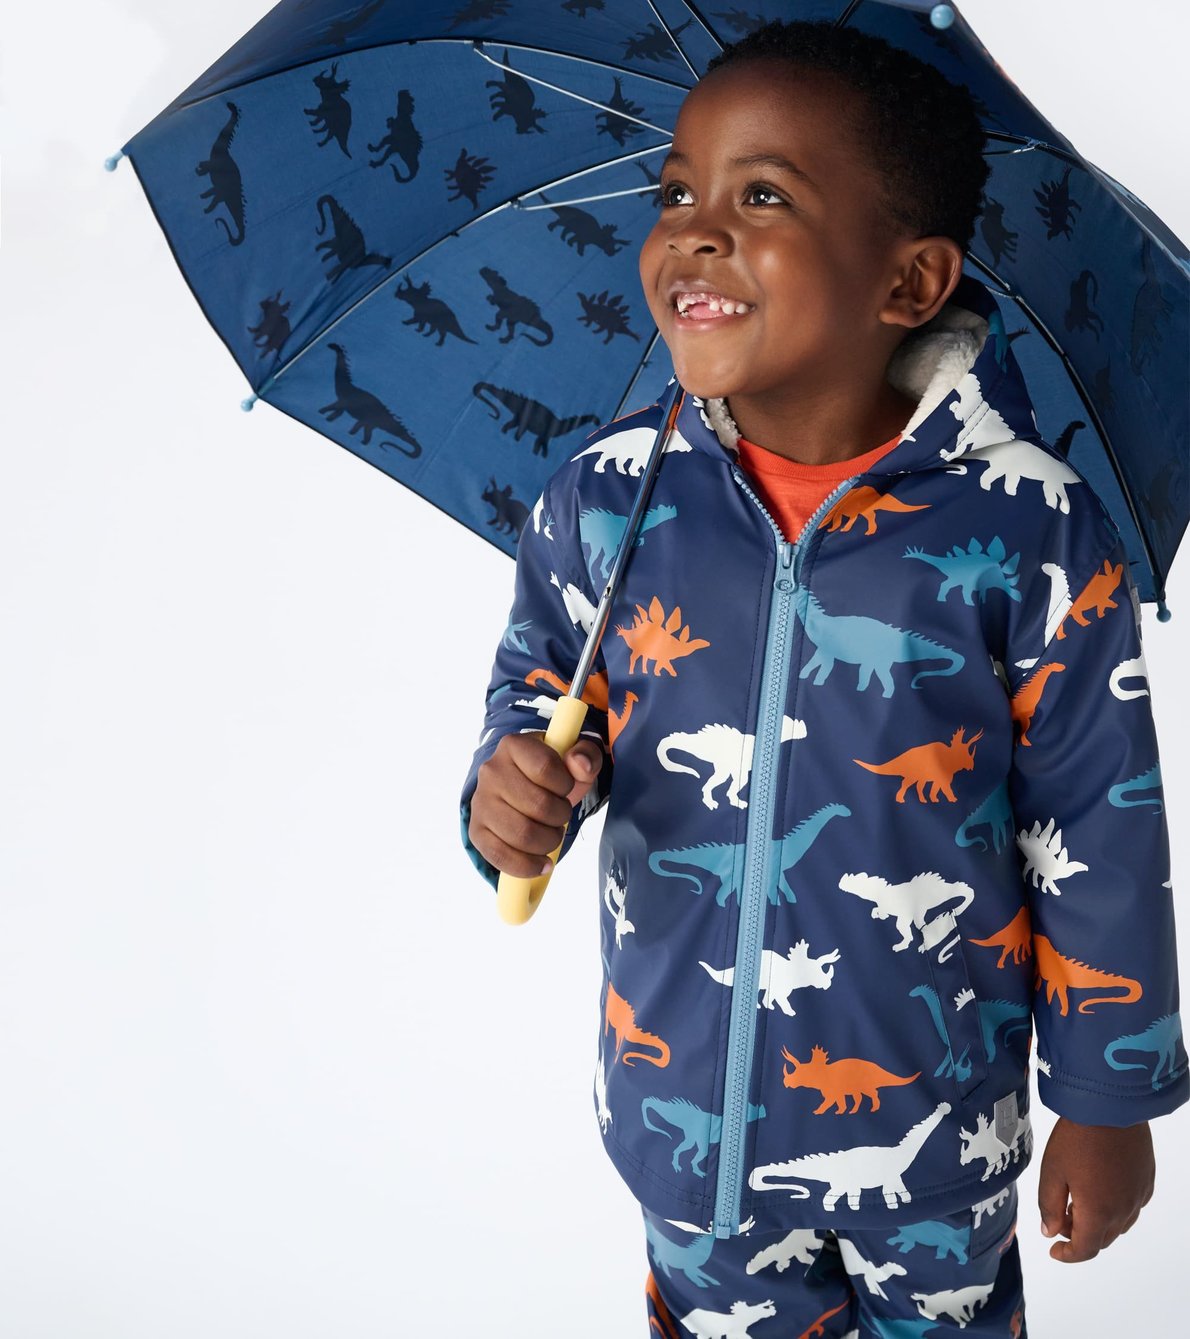 View larger image of Dino Silhouettes Colour Changing Raincoat